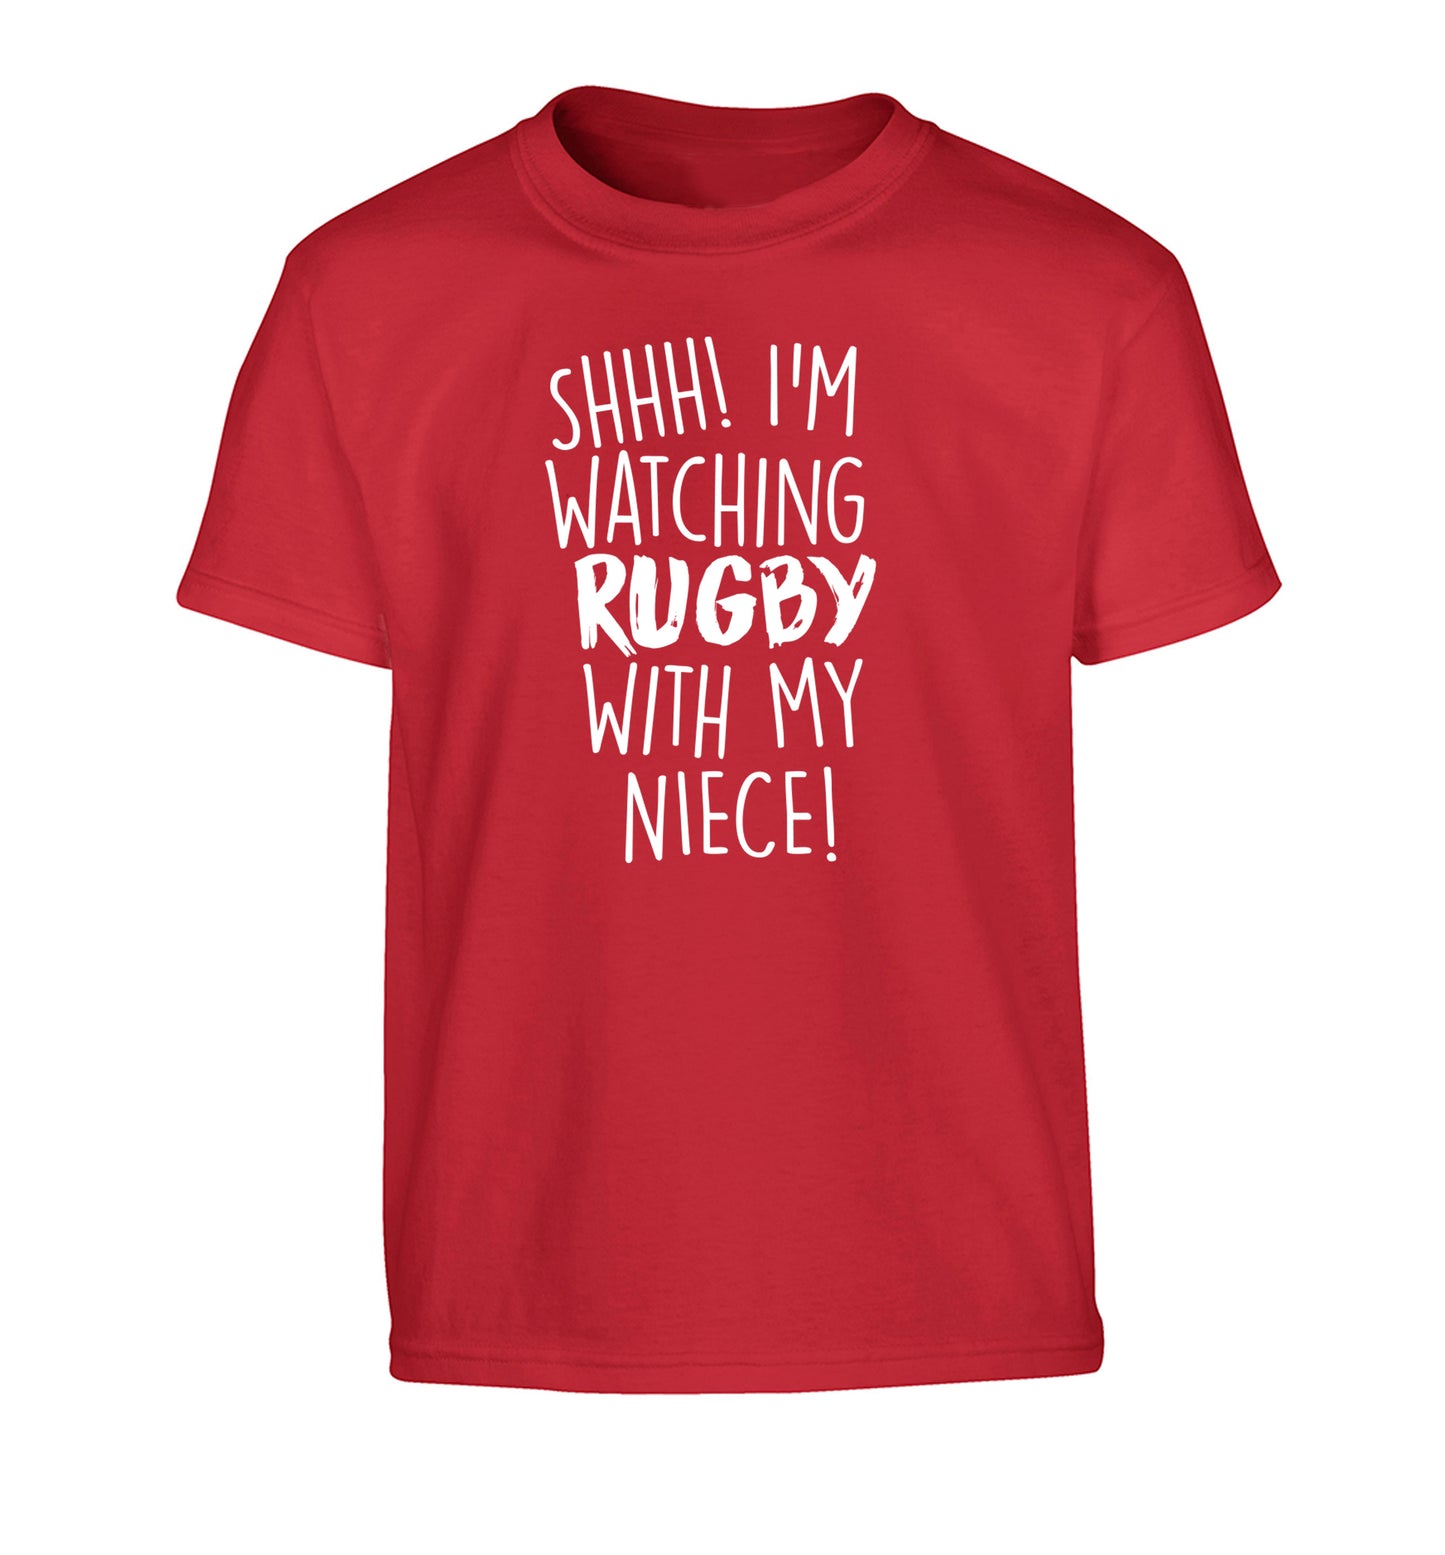 Shh.. I'm watching rugby with my niece Children's red Tshirt 12-13 Years